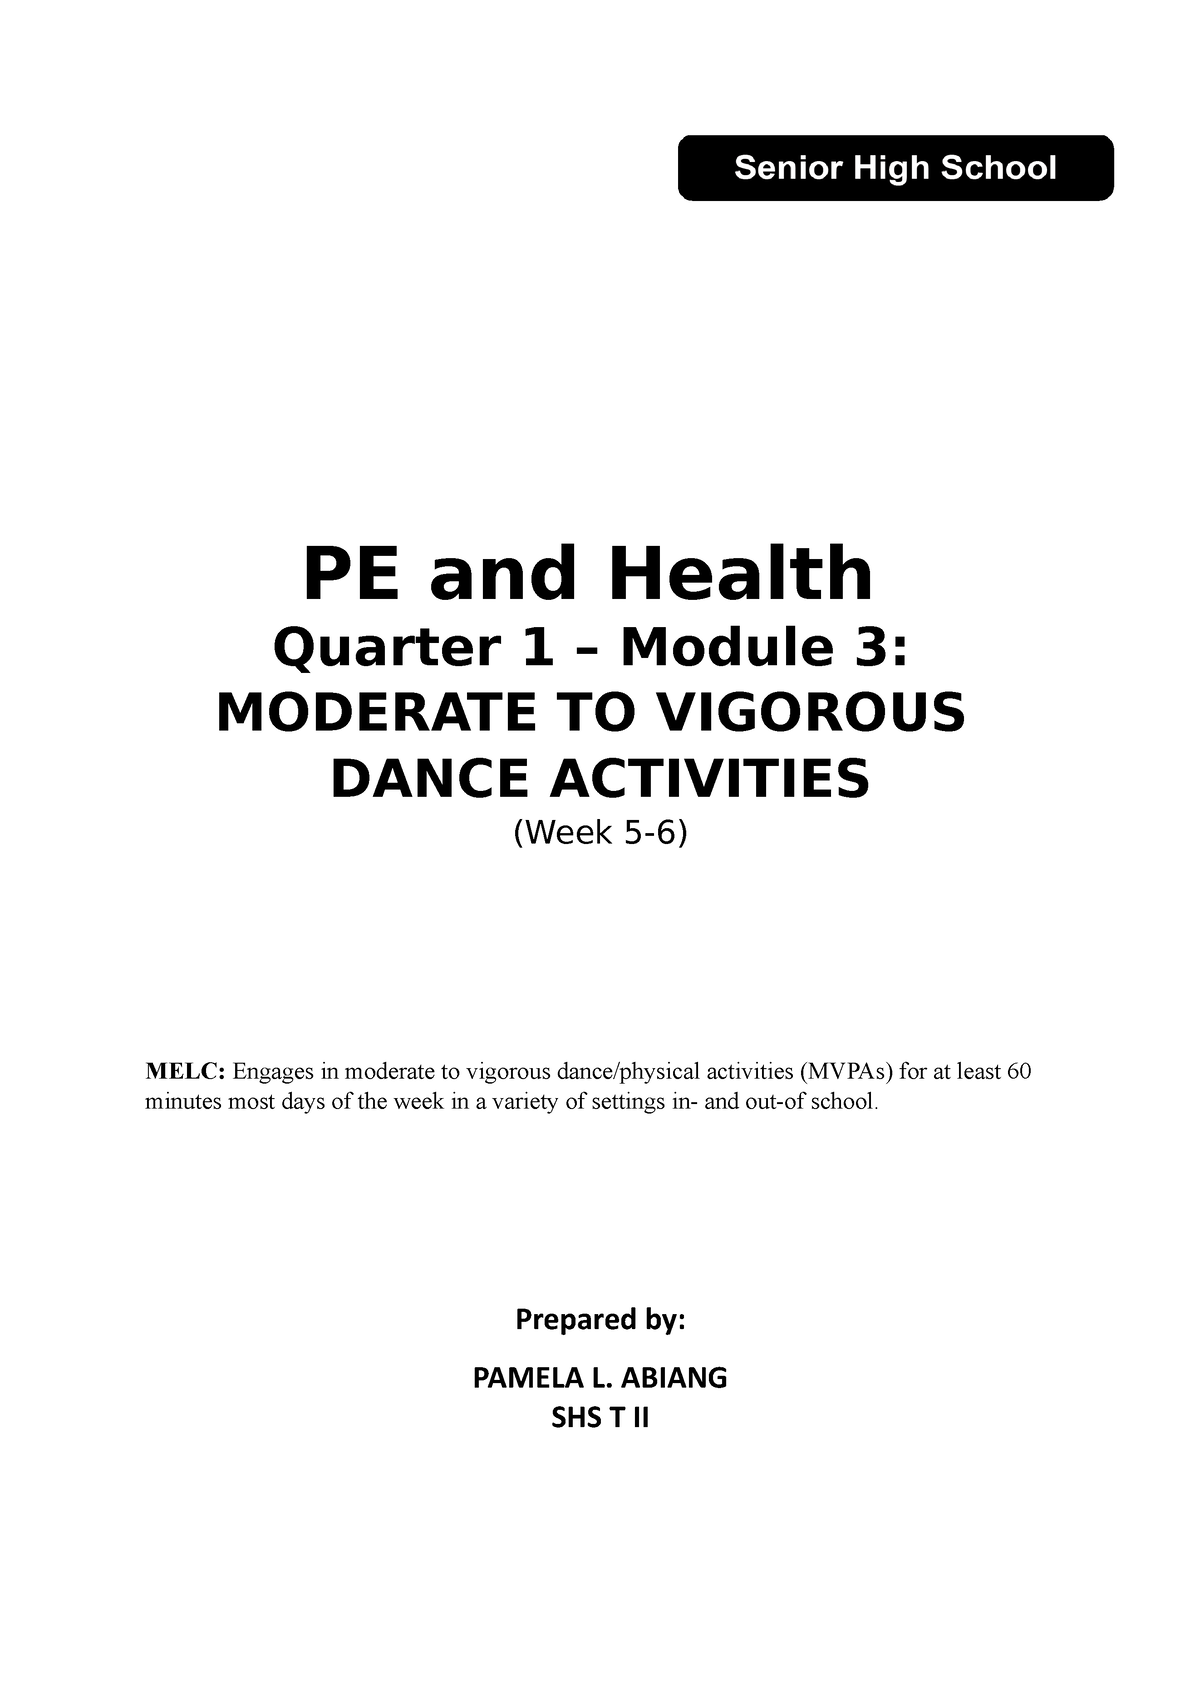 Physical Education And Health 3 Grade 12 Module 3 Pe And Health Quarter 1 Module 3 Moderate 8881